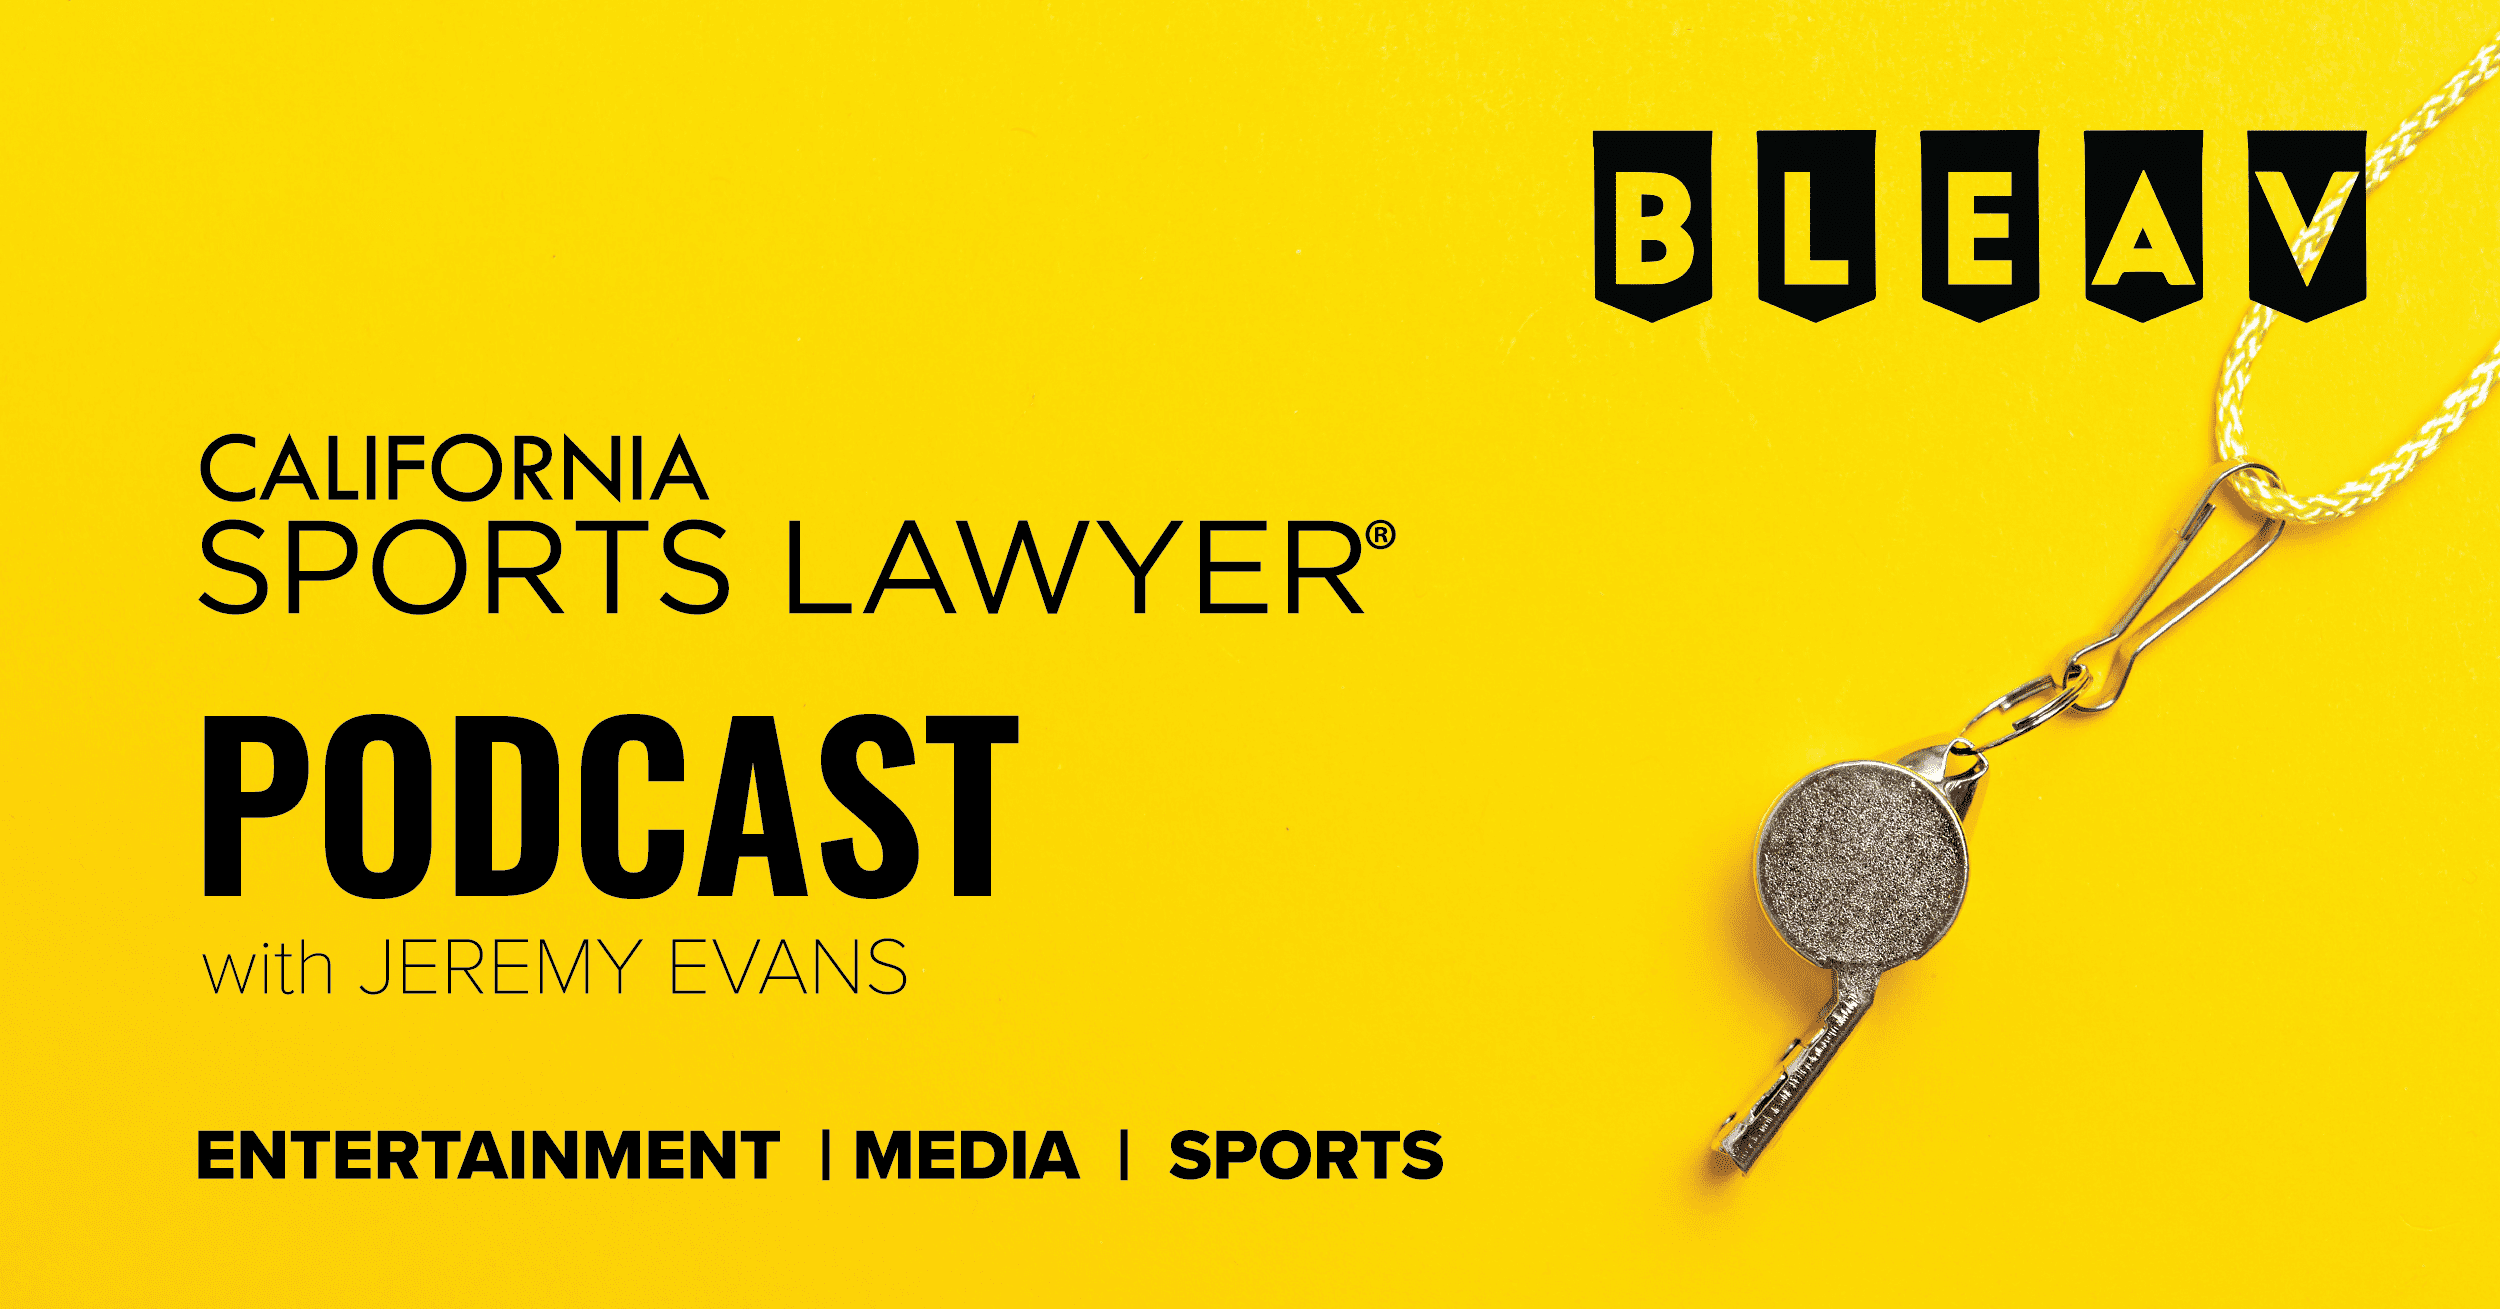 California Sports Lawyer® Podcast with Jeremy Evans: 30+ Minutes of Fame w/ Neil Rogers, author of 'Bar Tips'